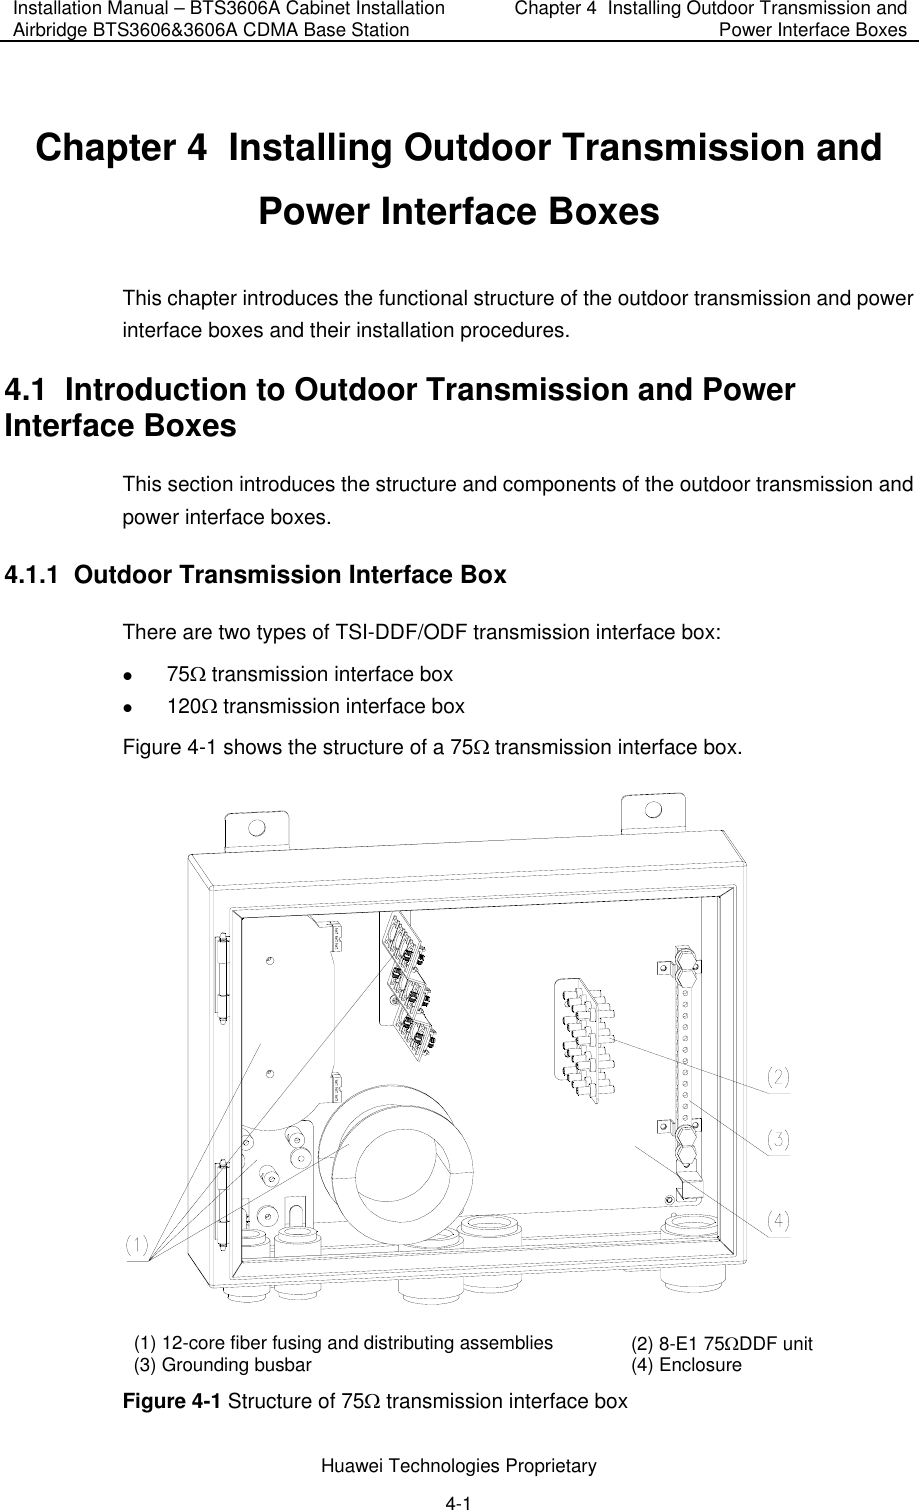 Installation Manual – BTS3606A Cabinet Installation Airbridge BTS3606&amp;3606A CDMA Base Station  Chapter 4  Installing Outdoor Transmission and Power Interface Boxes  Huawei Technologies Proprietary 4-1 Chapter 4  Installing Outdoor Transmission and Power Interface Boxes This chapter introduces the functional structure of the outdoor transmission and power interface boxes and their installation procedures.  4.1  Introduction to Outdoor Transmission and Power Interface Boxes This section introduces the structure and components of the outdoor transmission and power interface boxes. 4.1.1  Outdoor Transmission Interface Box There are two types of TSI-DDF/ODF transmission interface box:  z 75Ω transmission interface box z 120Ω transmission interface box Figure 4-1 shows the structure of a 75Ω transmission interface box.  (1) 12-core fiber fusing and distributing assemblies (2) 8-E1 75ΩDDF unit (3) Grounding busbar (4) Enclosure Figure 4-1 Structure of 75Ω transmission interface box 